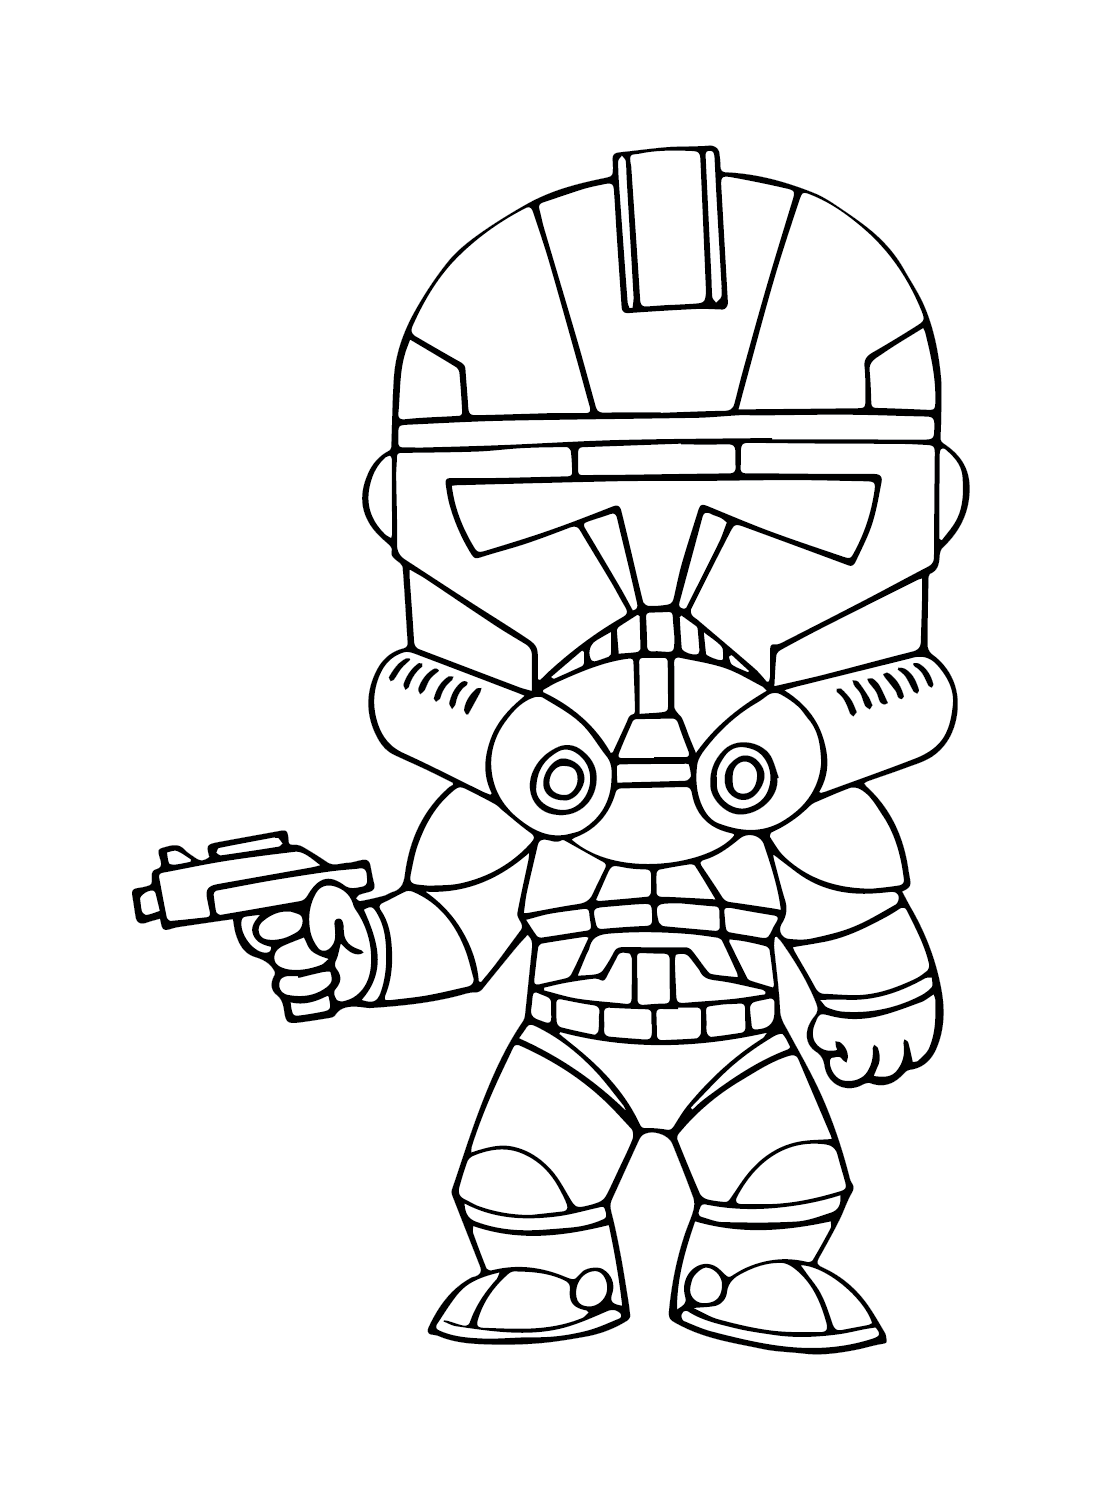 Chibi Shock Trooper Coloring Page - Free Printable Coloring Pages